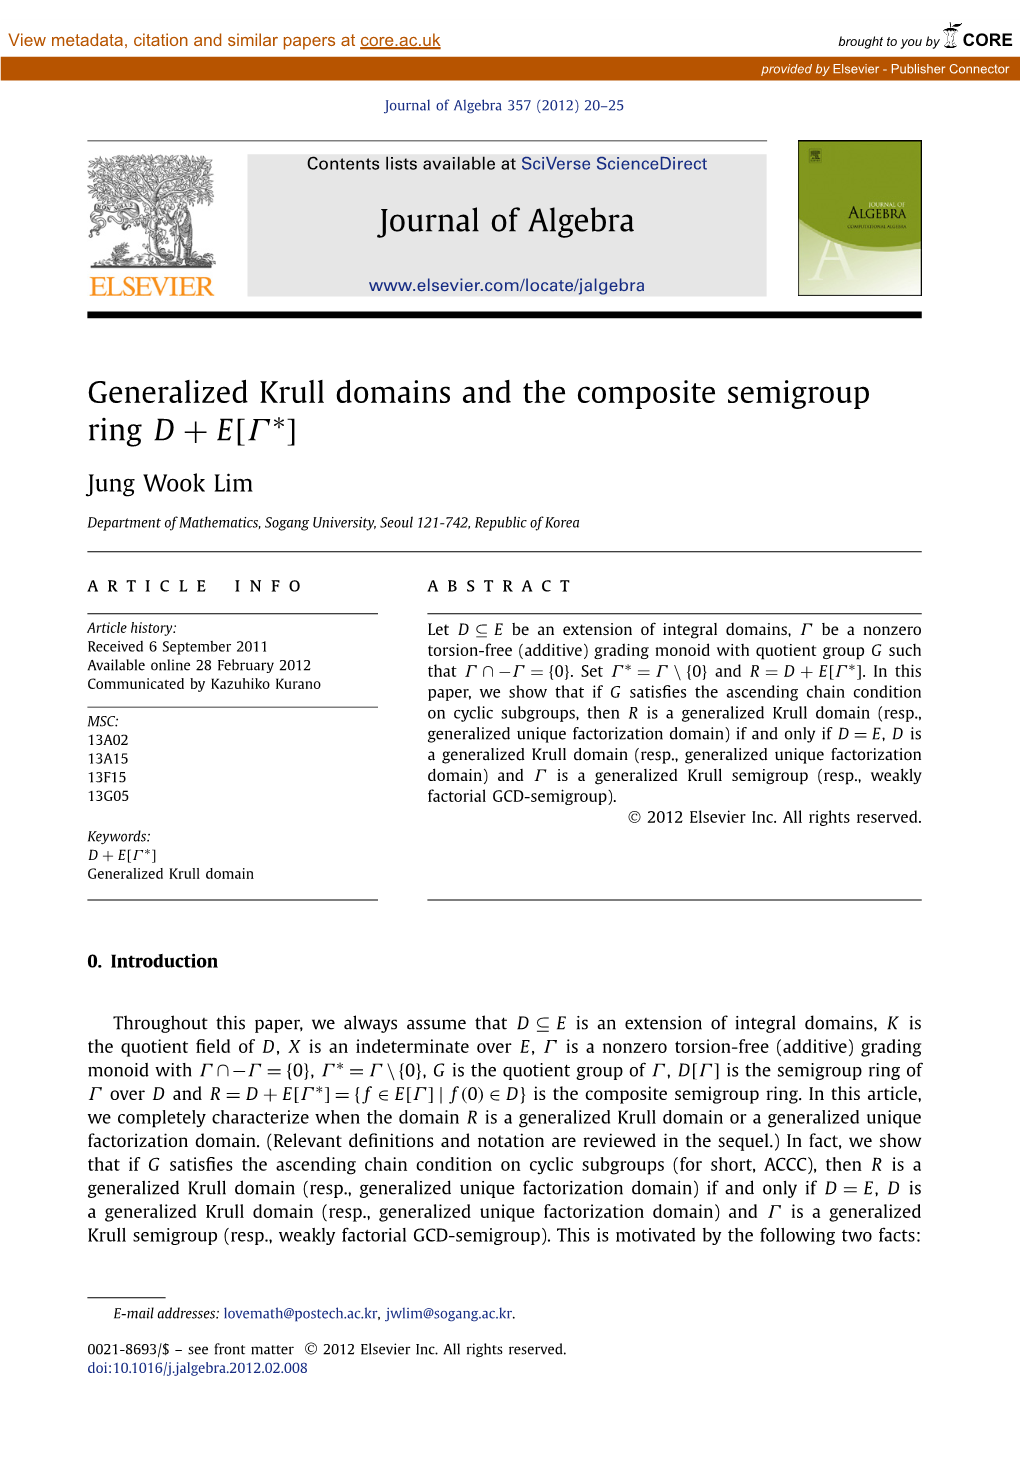 Generalized Krull Domains and the Composite Semigroup Ring D+E[Γ*]